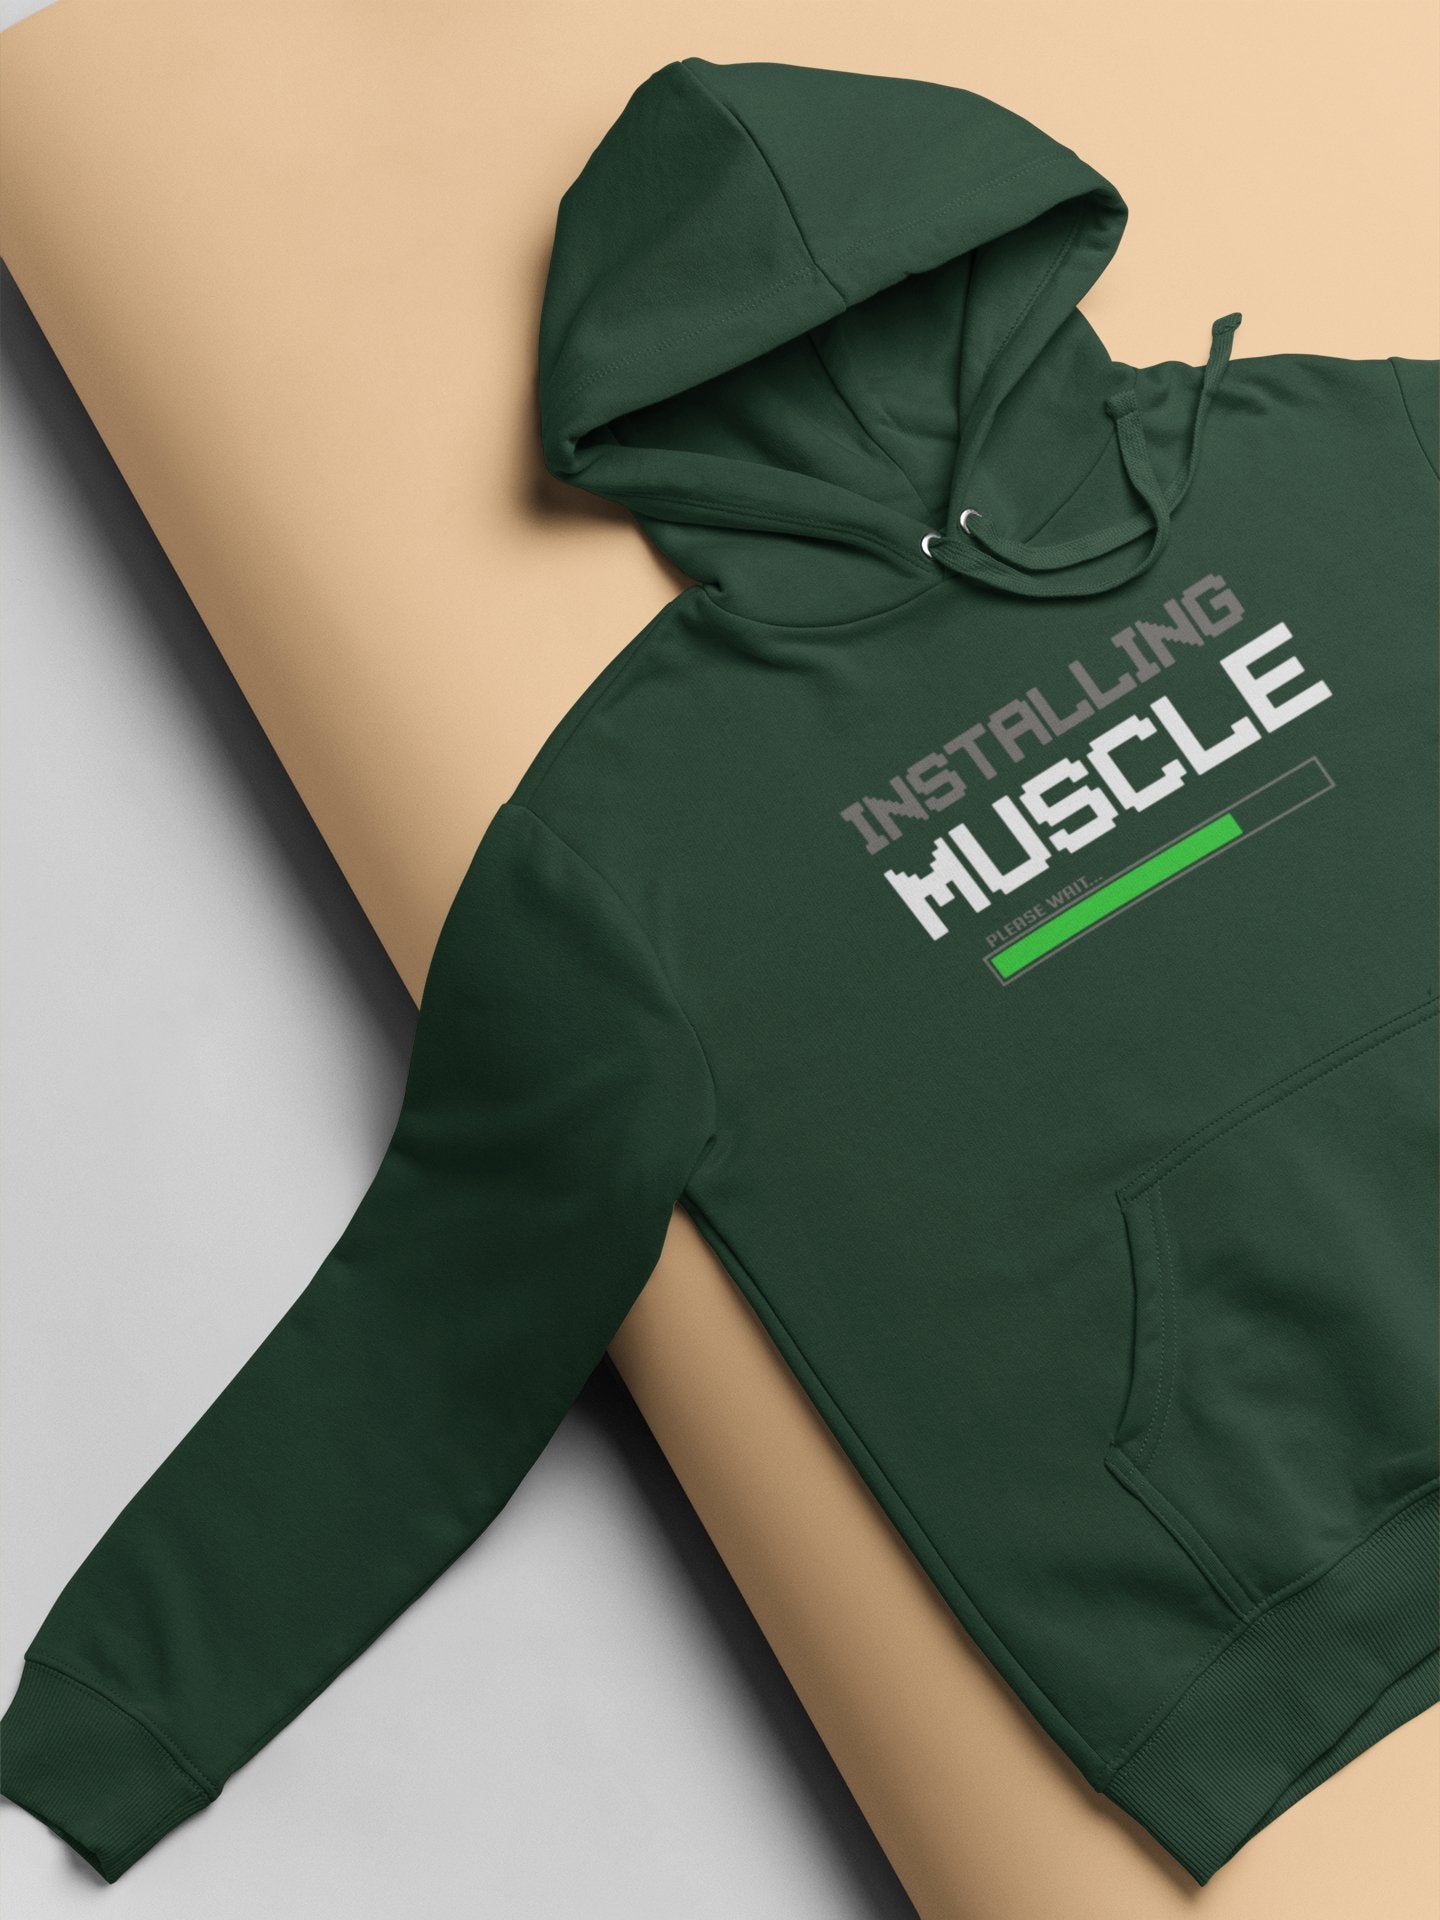 Installing Muscles Gym And Workout Hoodies for Women-FunkyTradition - Funky Tees Club